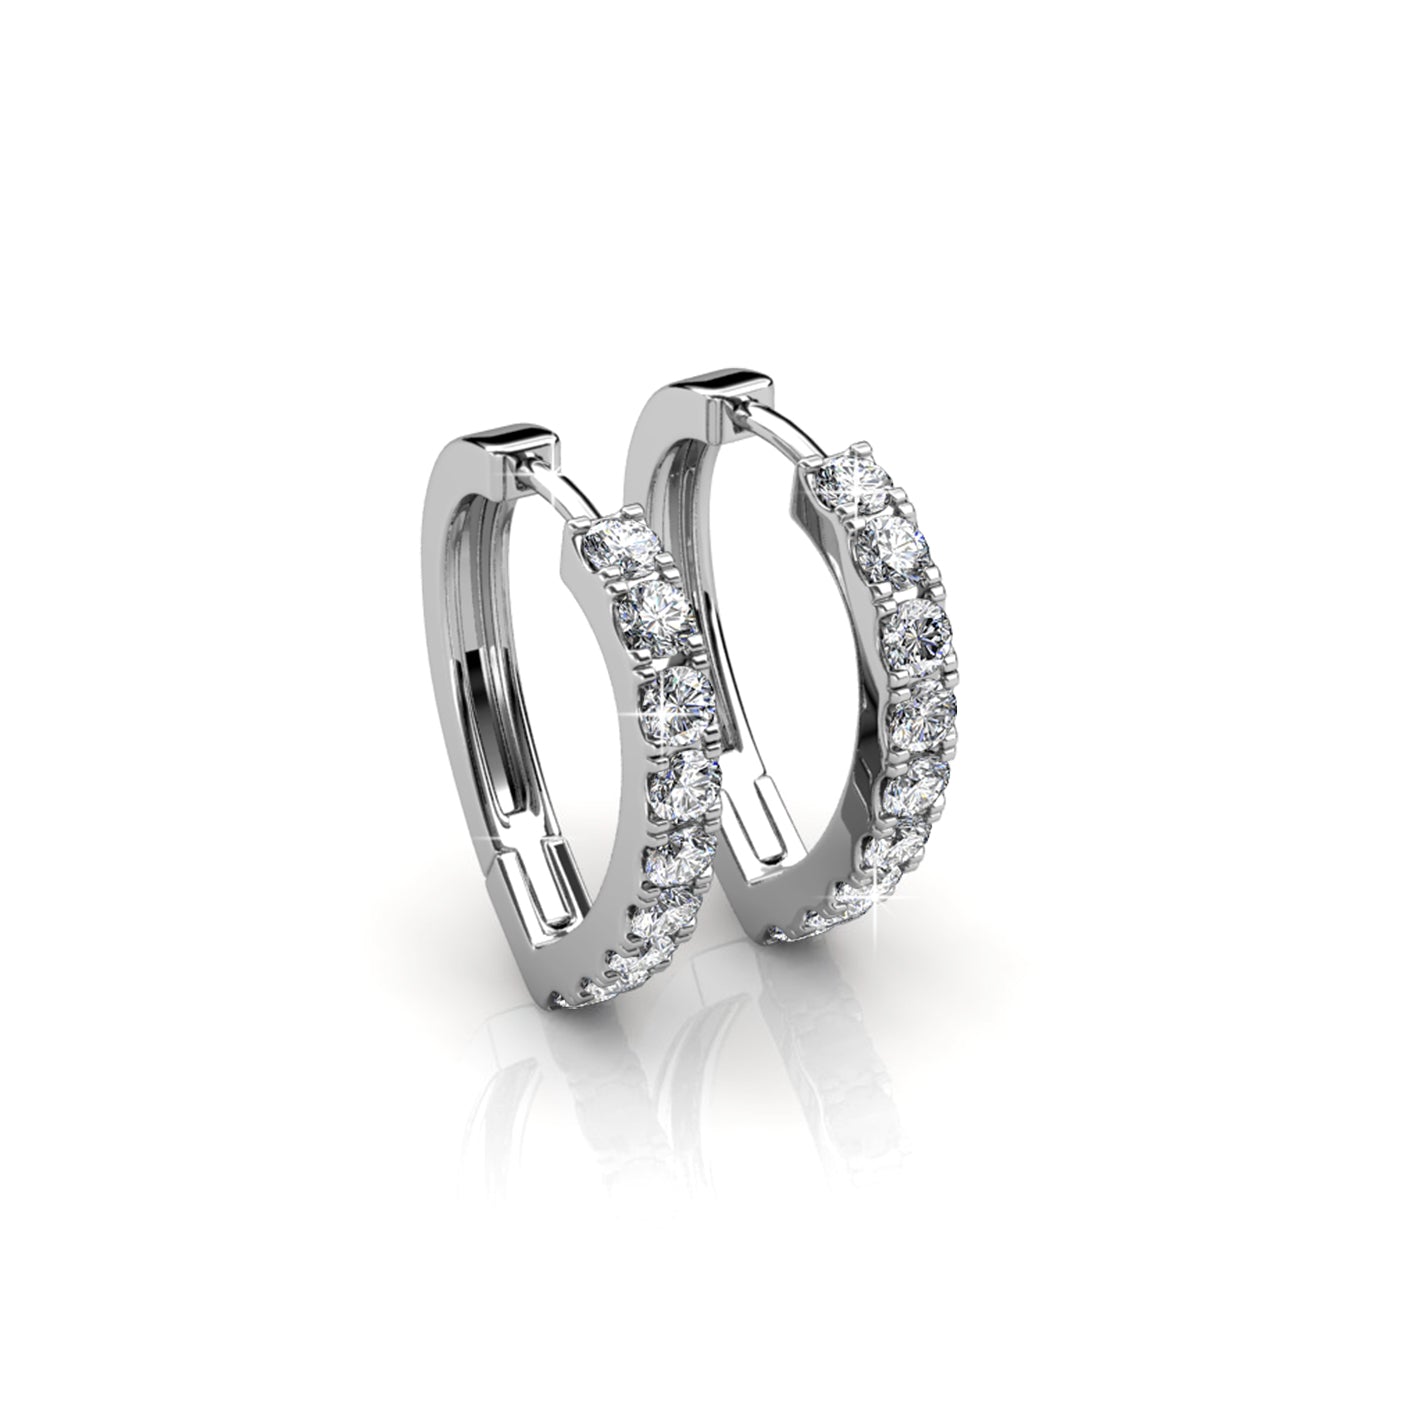 Waverly 18k White Gold Plated Hoop Earrings with Crystals